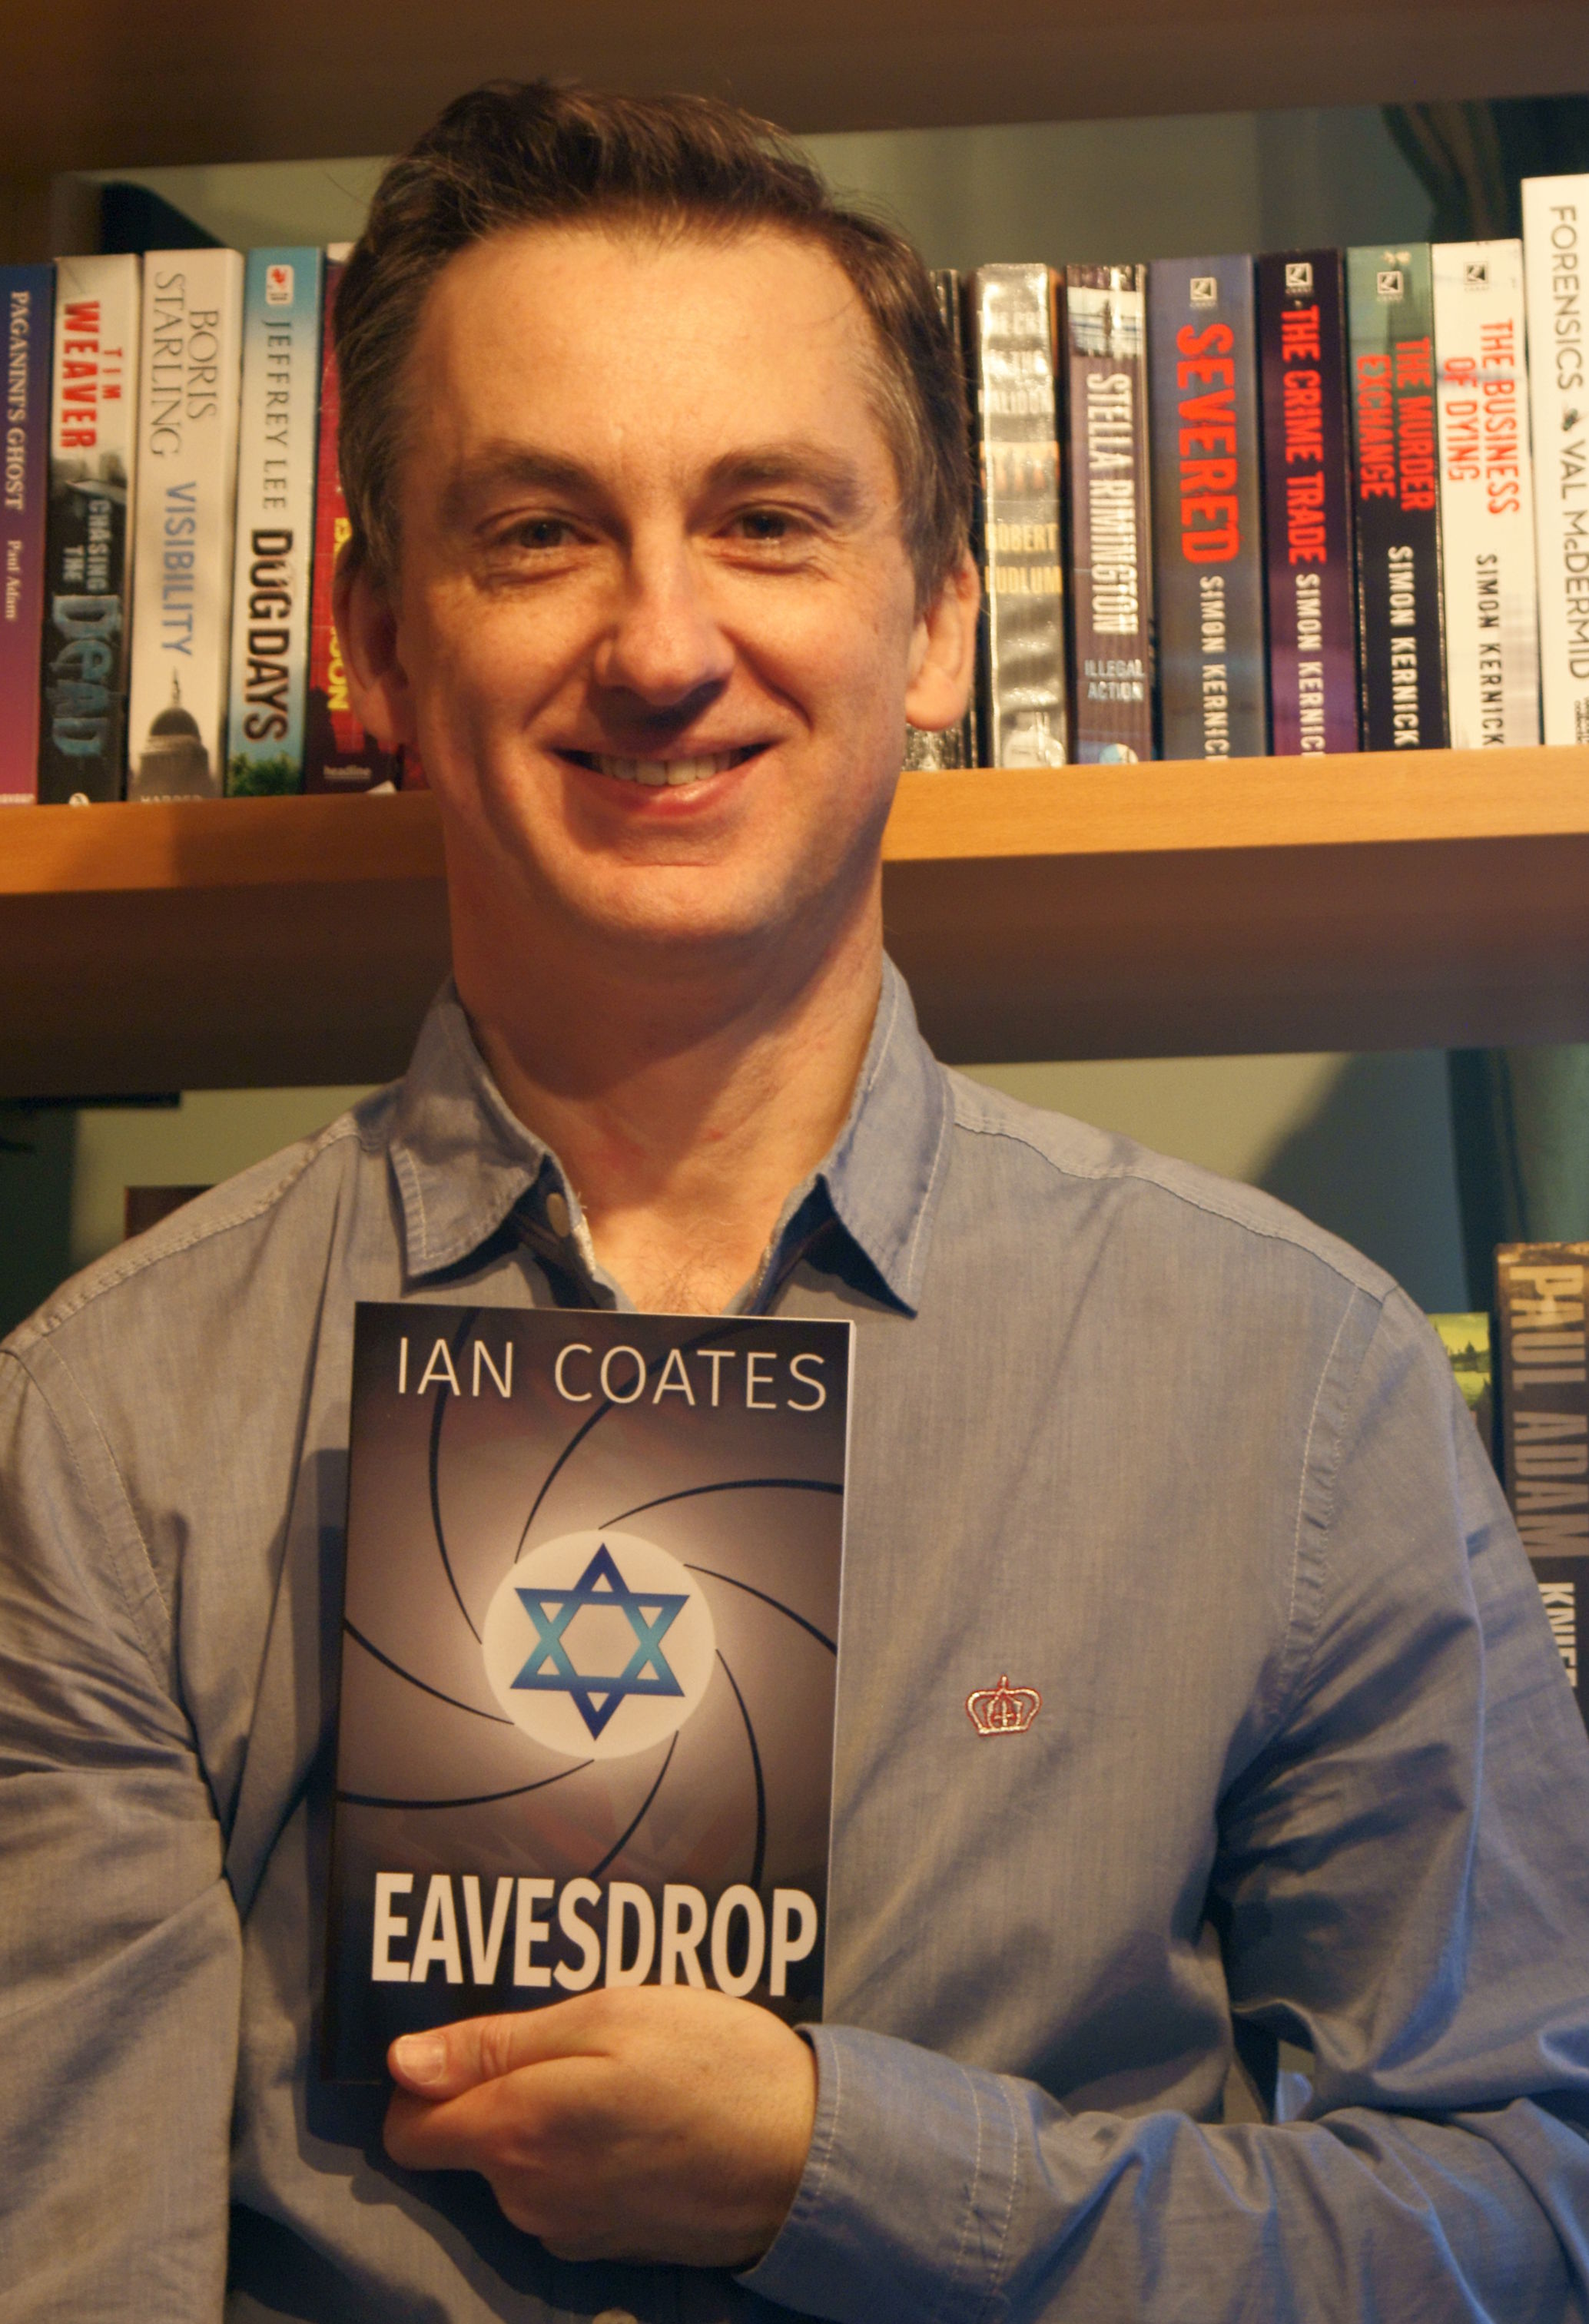 Author Ian Coates with debut thriller Eavesdrop